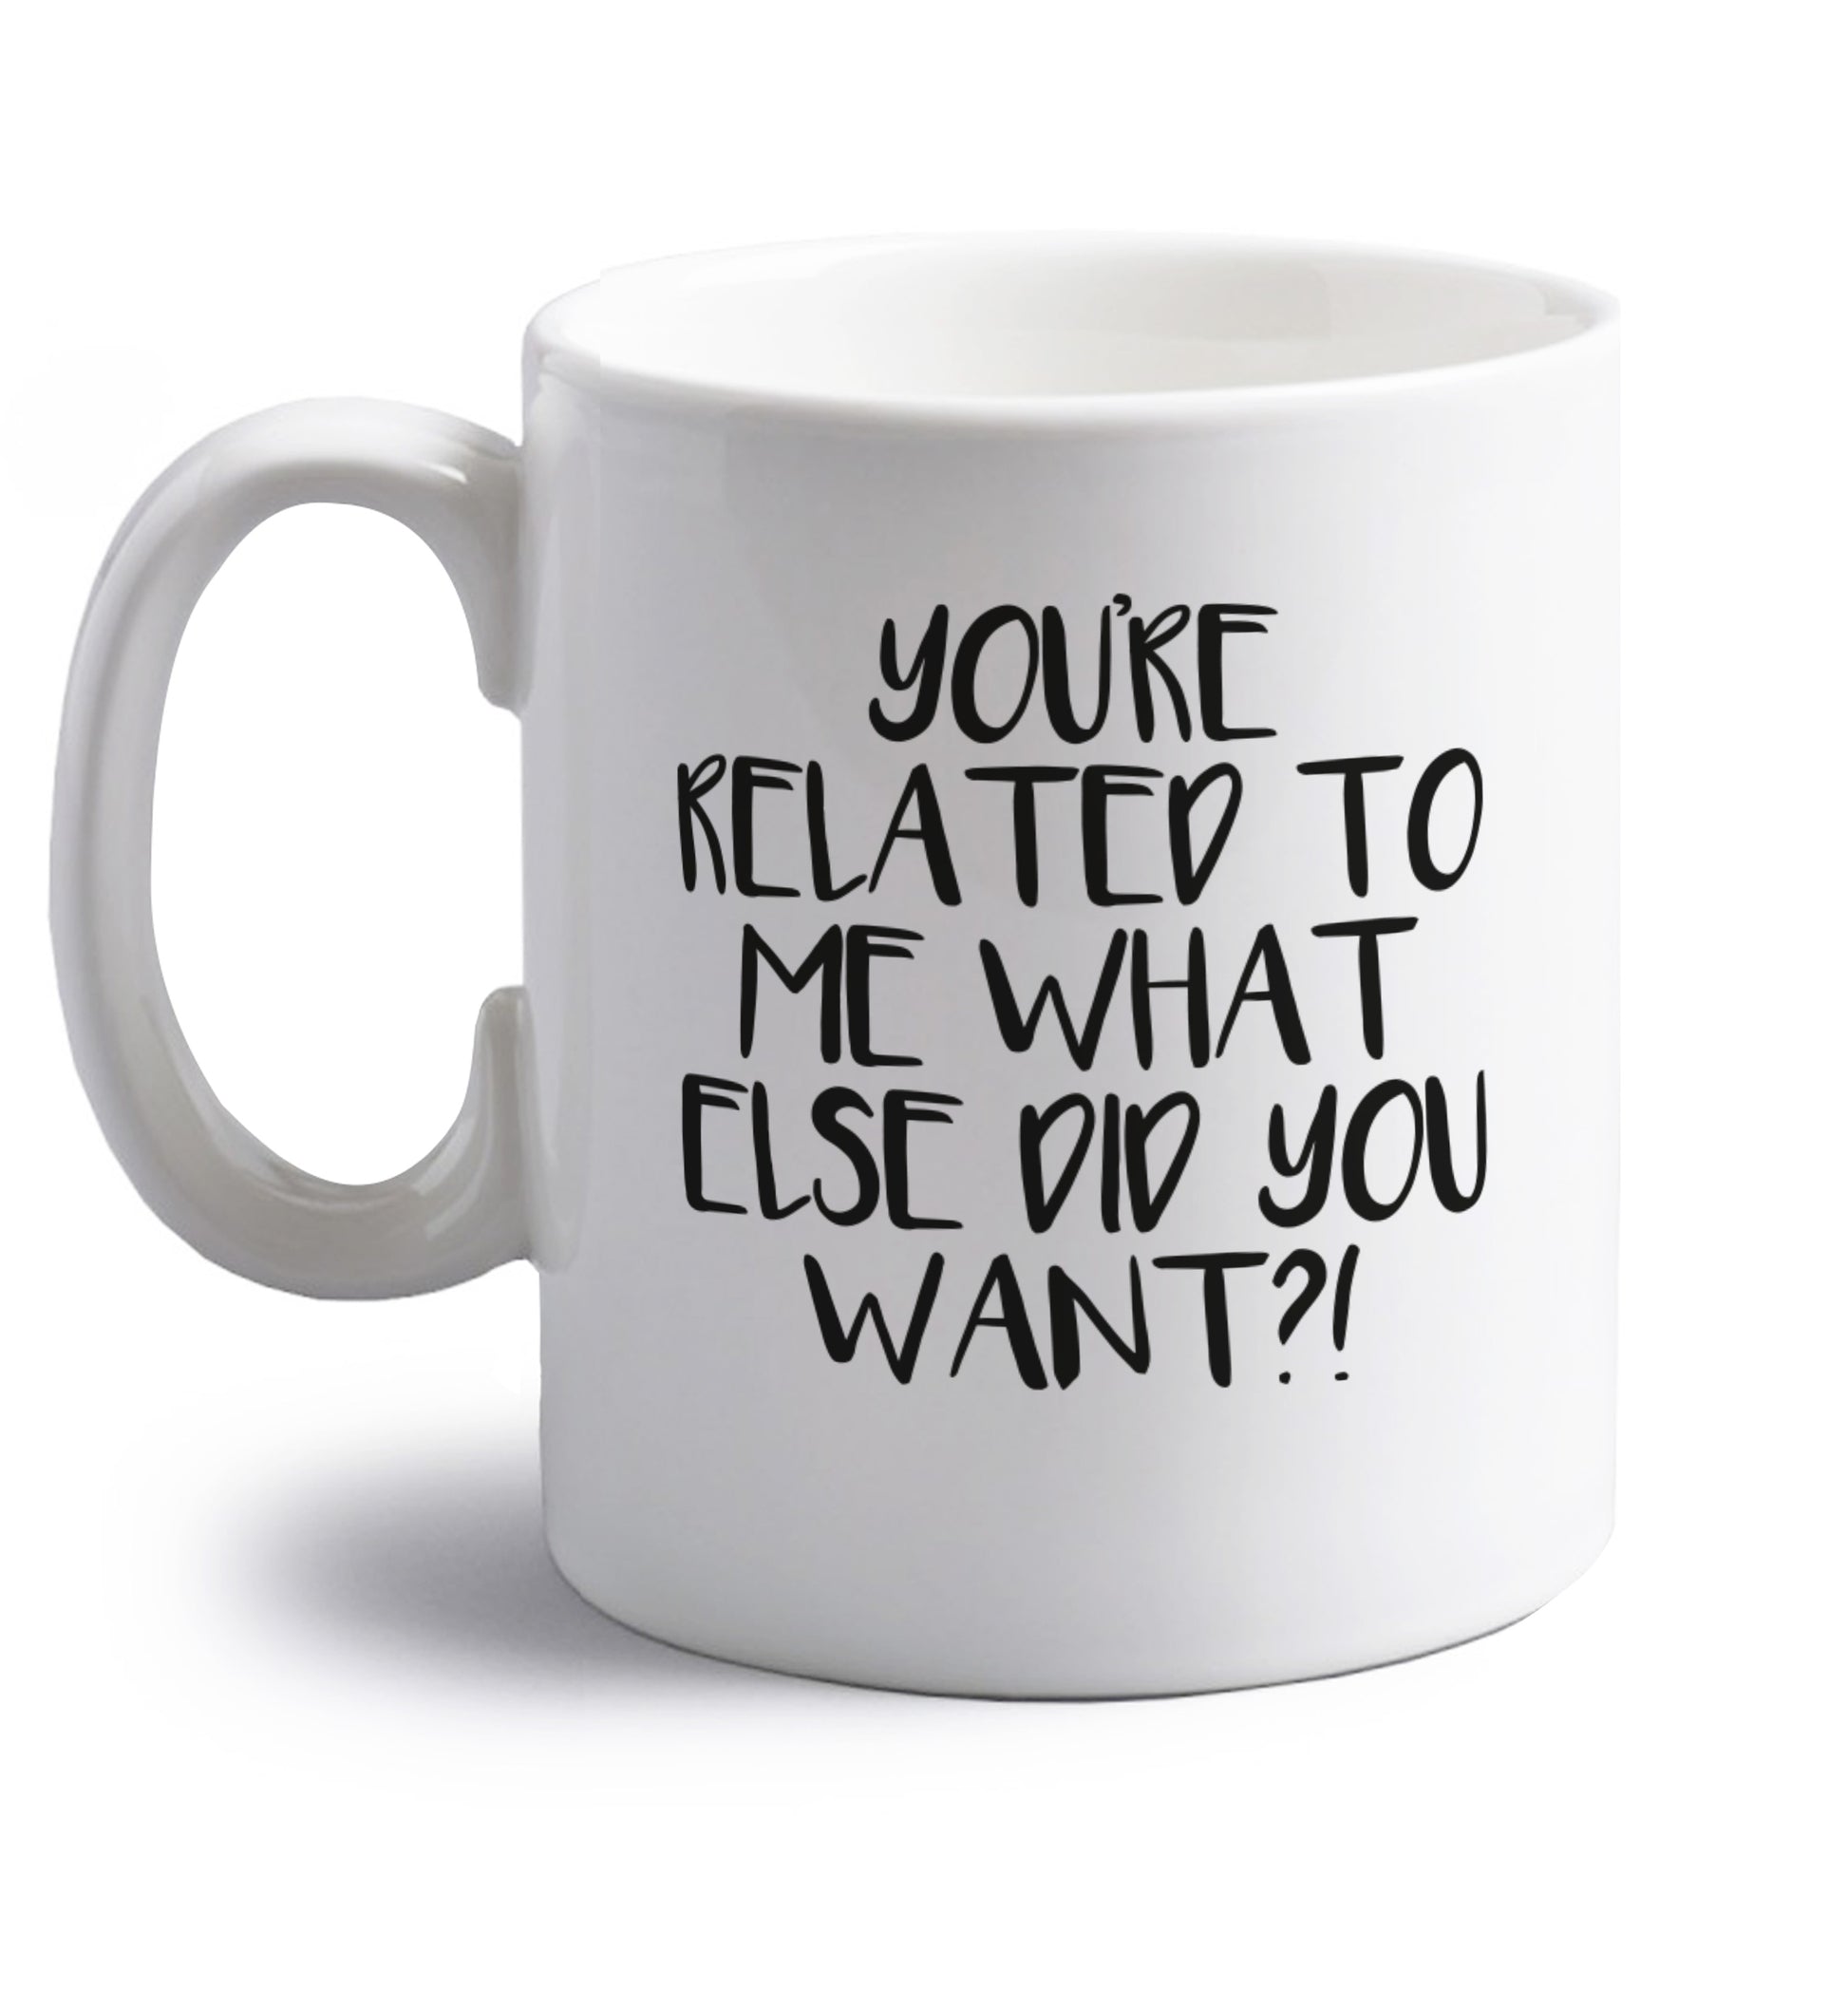 You're related to me what more do you want? right handed white ceramic mug 